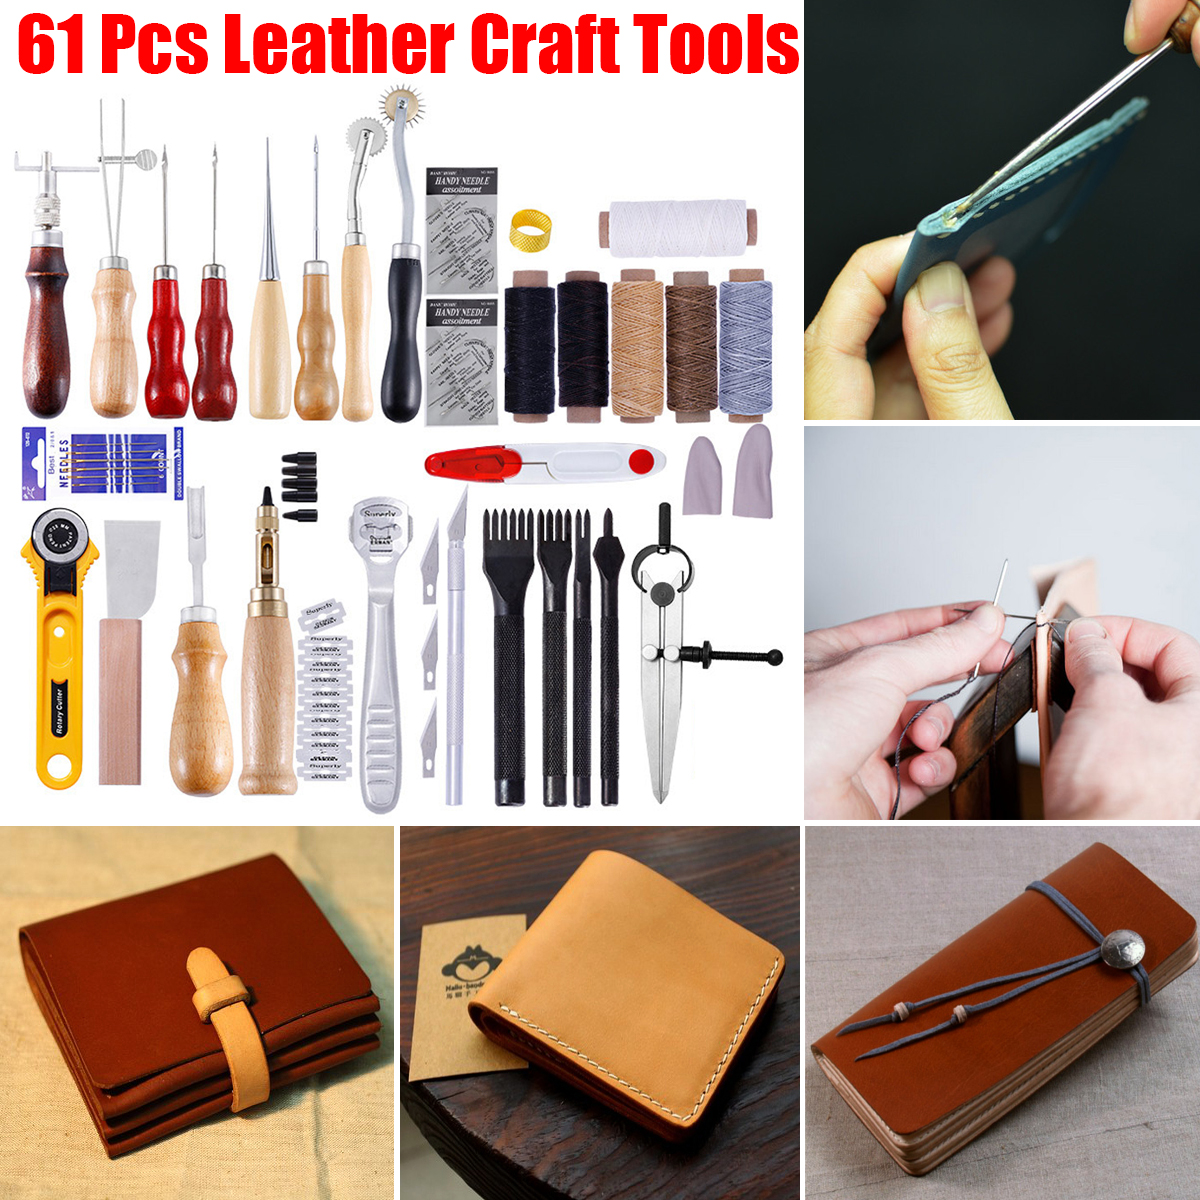 61Pcs-Leather-Craft-Tool-Kit-Hand-Sewing-Stitching-Punch-Carving-Saddle-Edger-1570180-1